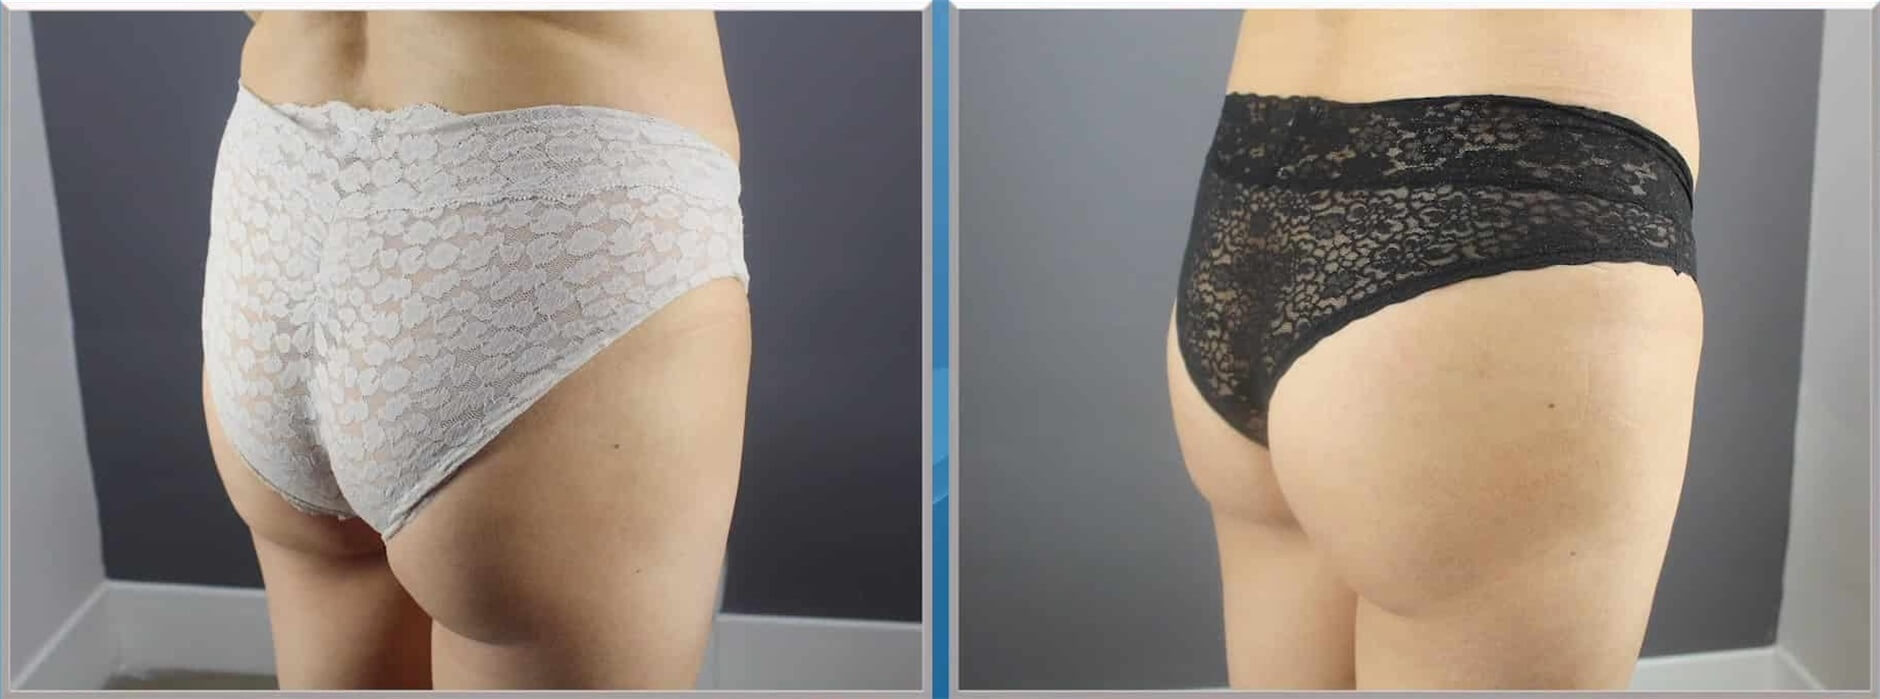 EMSculpt buttrocks before and after image 02